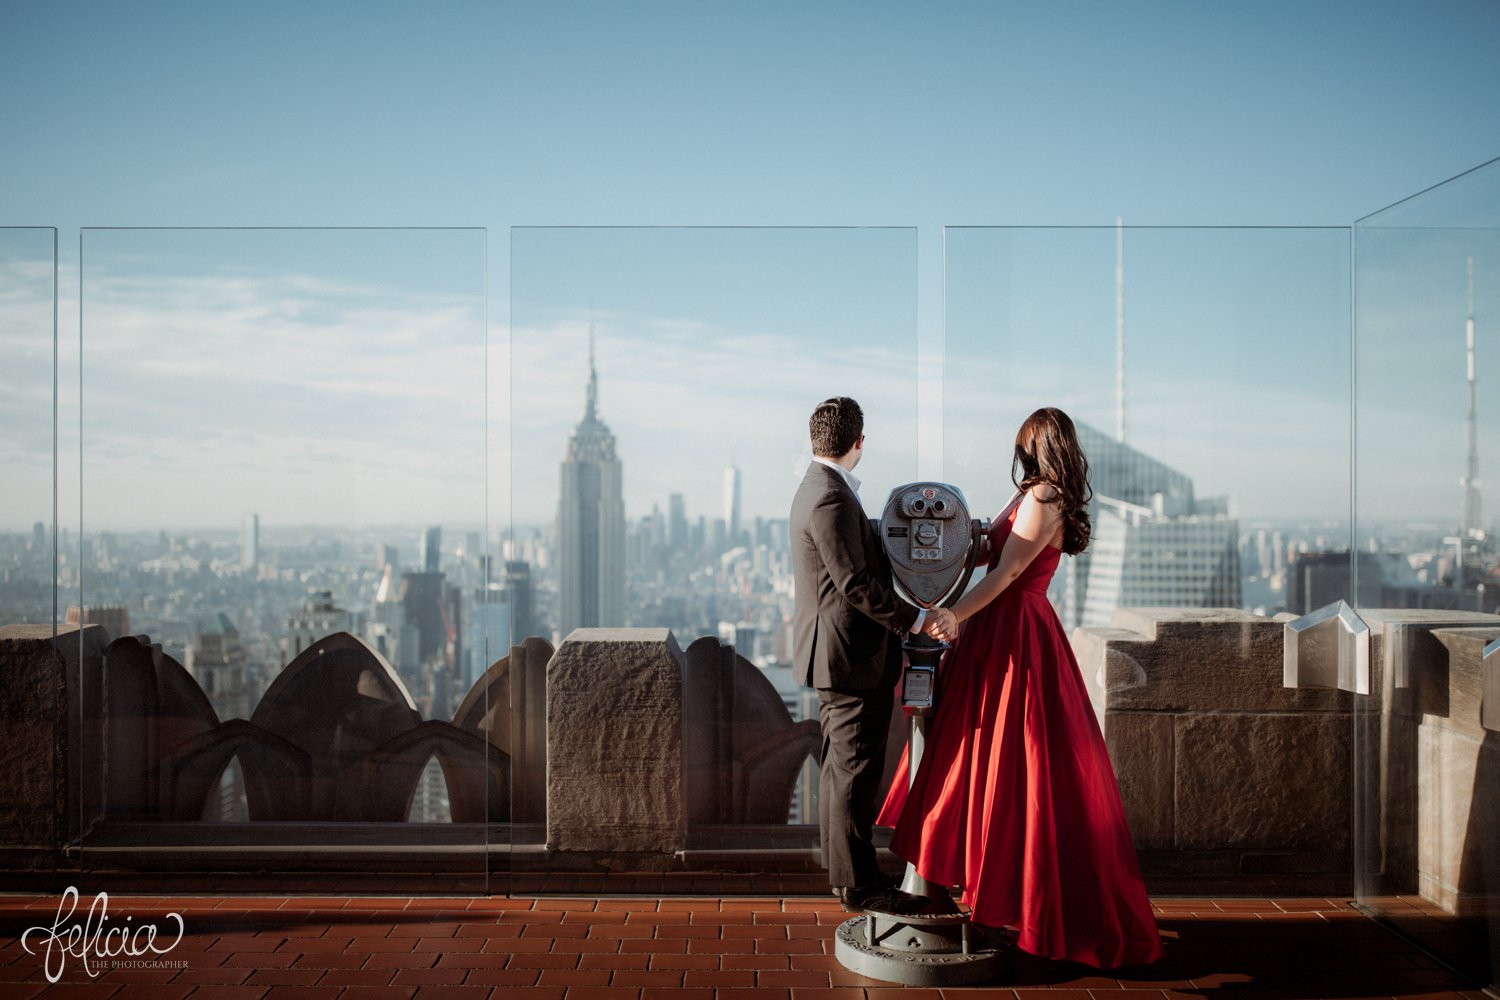 images by feliciathephotographer.com | destination wedding photographer | engagement | new york city | skyline | downtown | urban | formal | classic | elegant | long red gown | suit and tie | top of the rock | sunrise | elegant | glam | kiss | romantic |